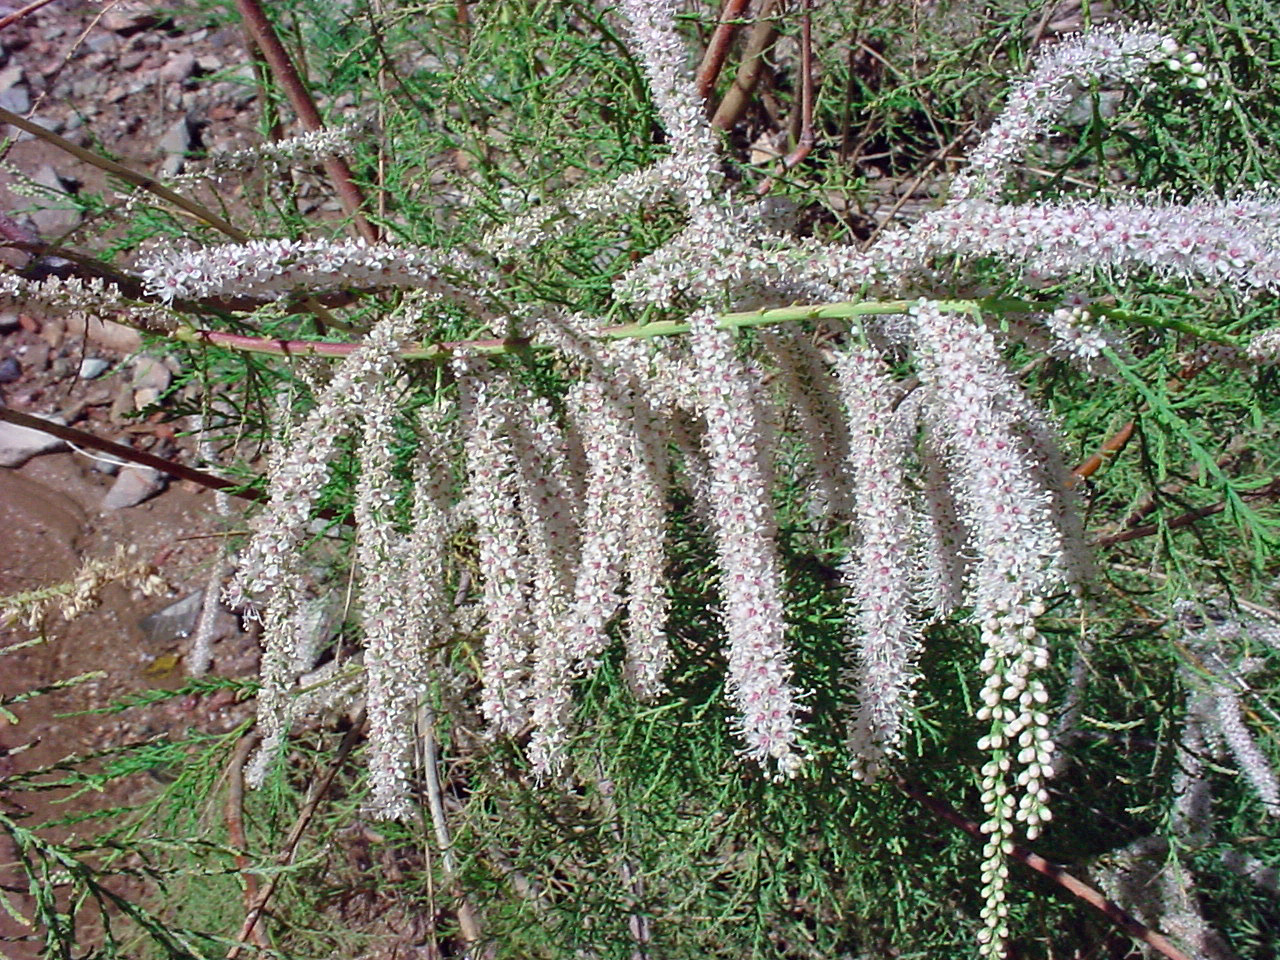 Pink-white, drooping inflorescences